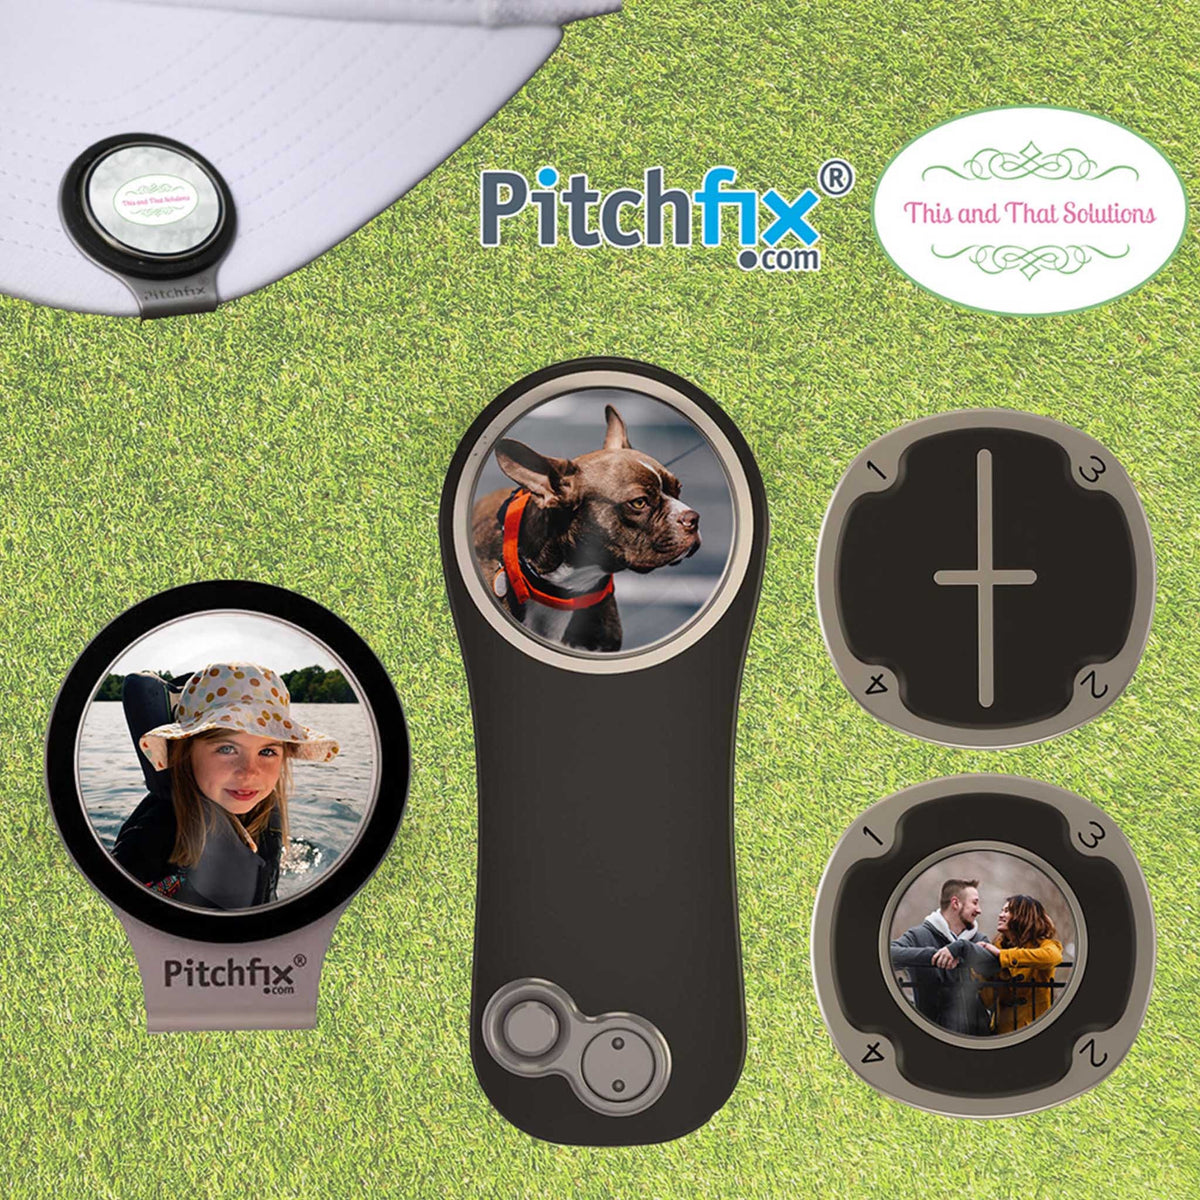 Personalized PitchFix Divot Tool | Golf Accessories | Golf Gifts | Happy Fathers Day